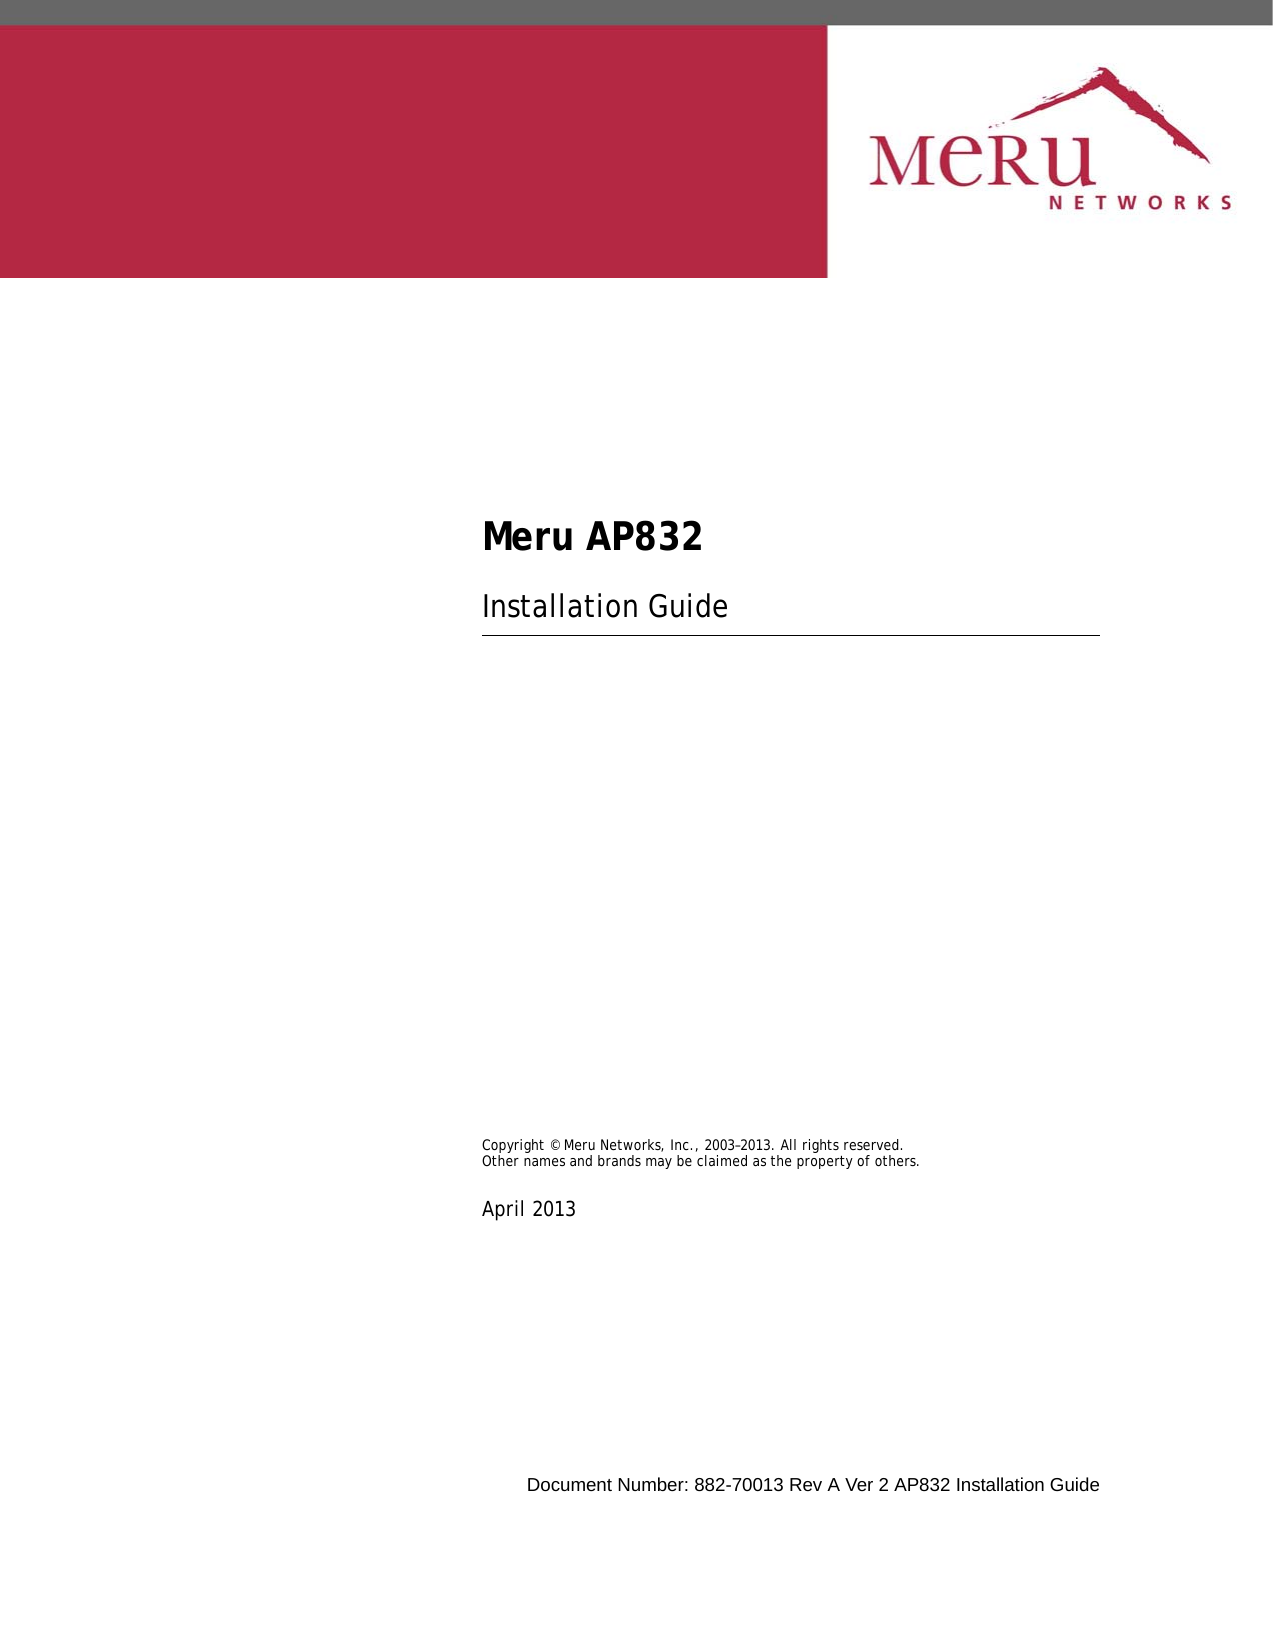 Meru AP832Installation GuideCopyright © Meru Networks, Inc., 2003–2013. All rights reserved.Other names and brands may be claimed as the property of others.April 2013Document Number: 882-70013 Rev A Ver 2 AP832 Installation Guide